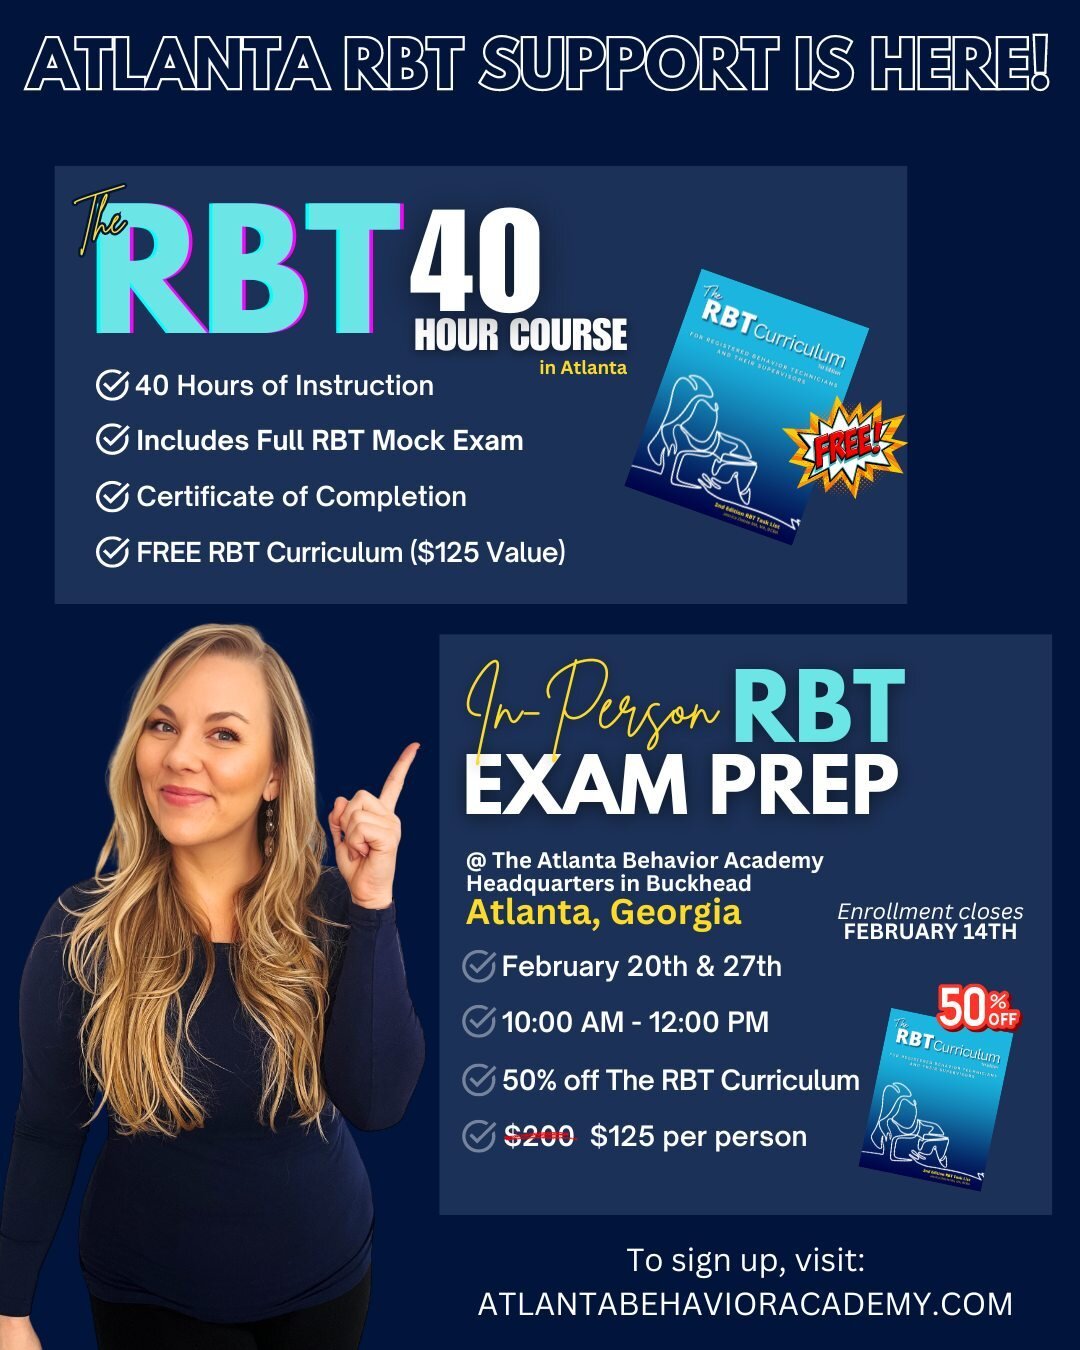 Whatever your RBT needs are, we've got them covered. And apparently you're wanting to learn with us in person which we LOVE!  Join us in Atlanta (Buckhead area) for either the 40 Hour Course, or for some exam prep before you sit for the #rbtexam  Sig